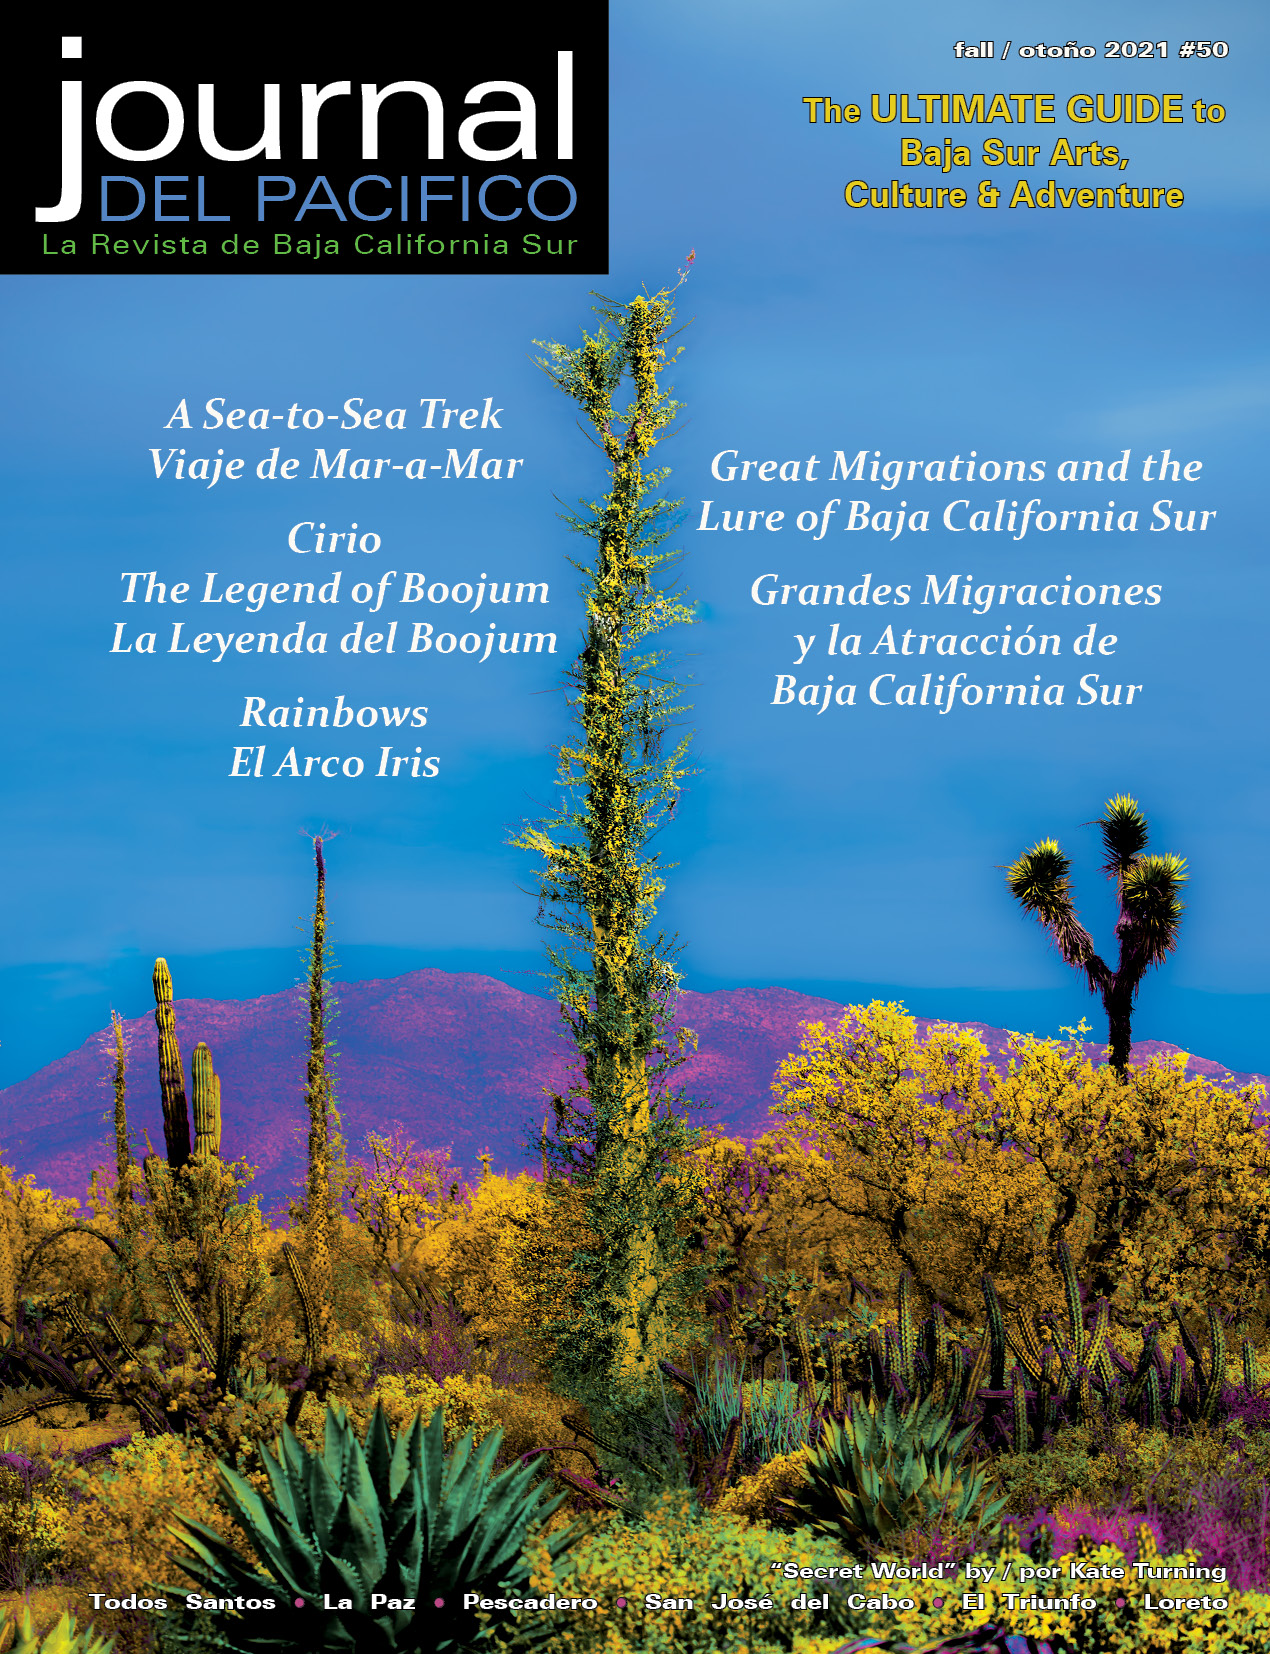 Fall/Otoño 2021 Issue of Journal del Pacifico